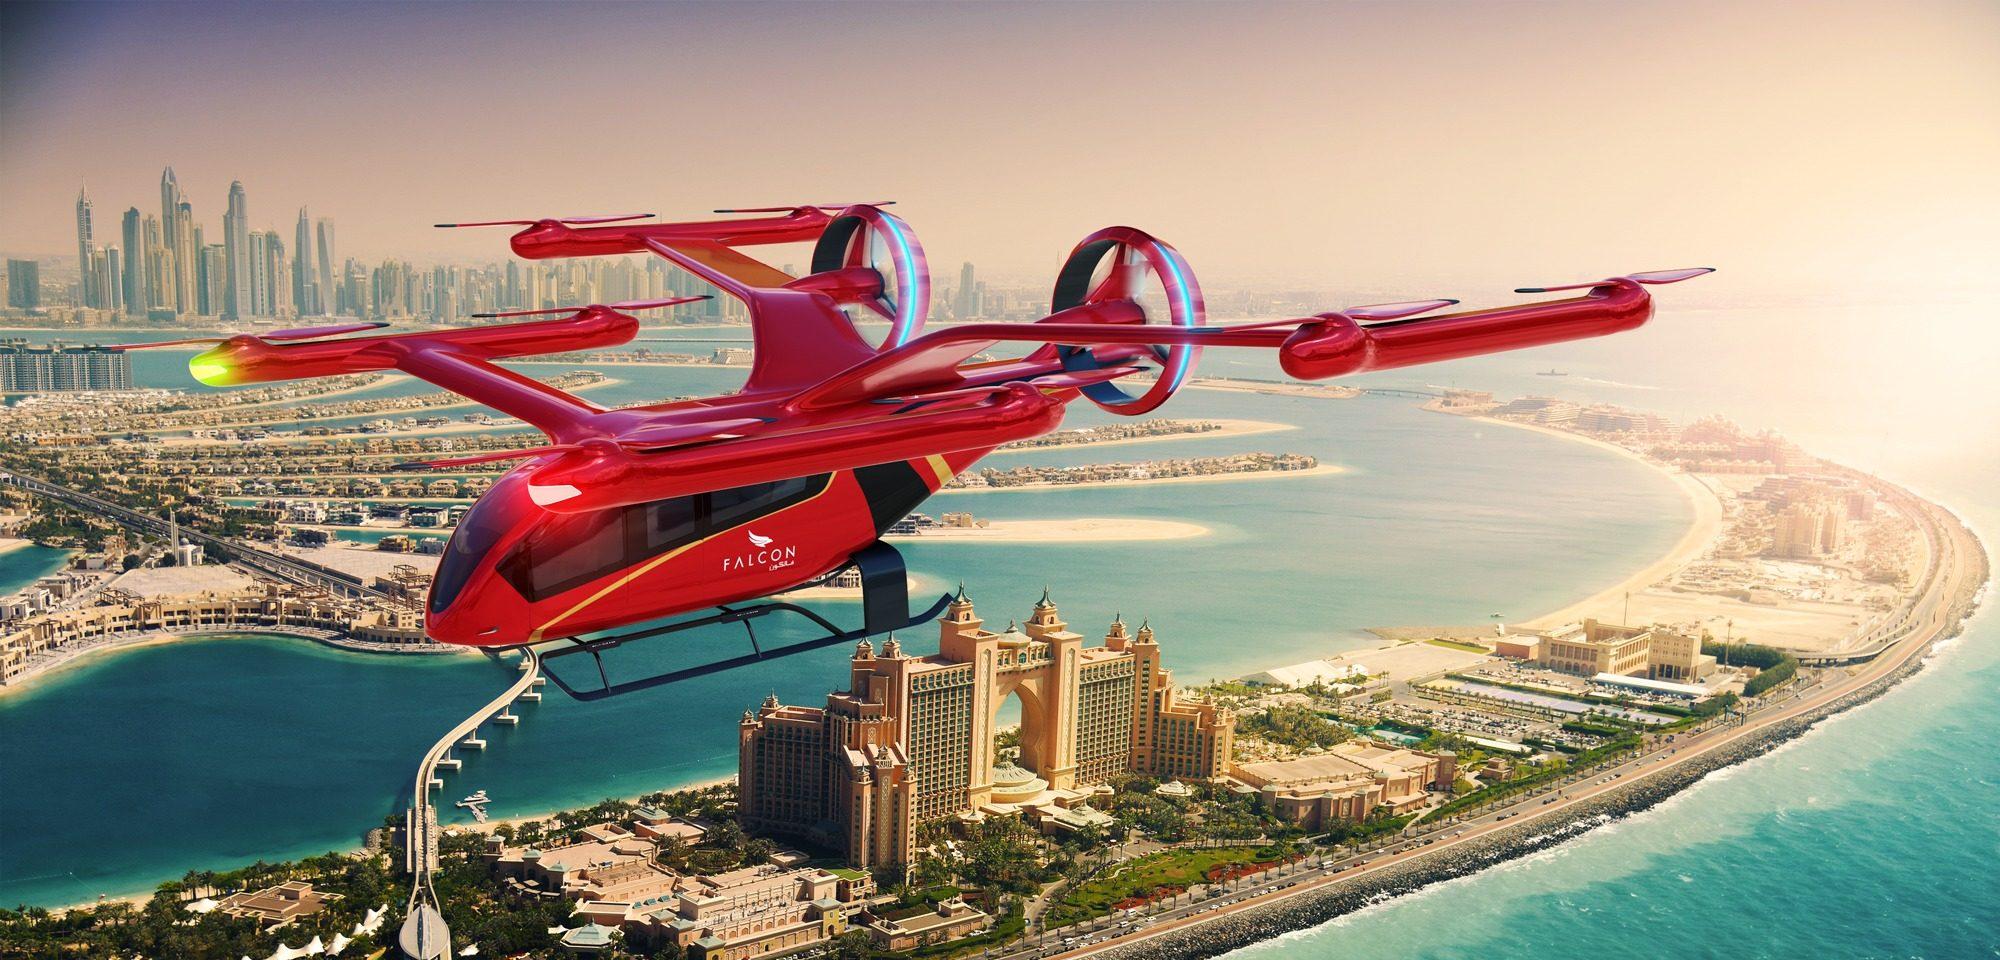 Product Eve and Falcon Aviation Services announce partnership to introduce eVTOL flights in Dubai - Eve image